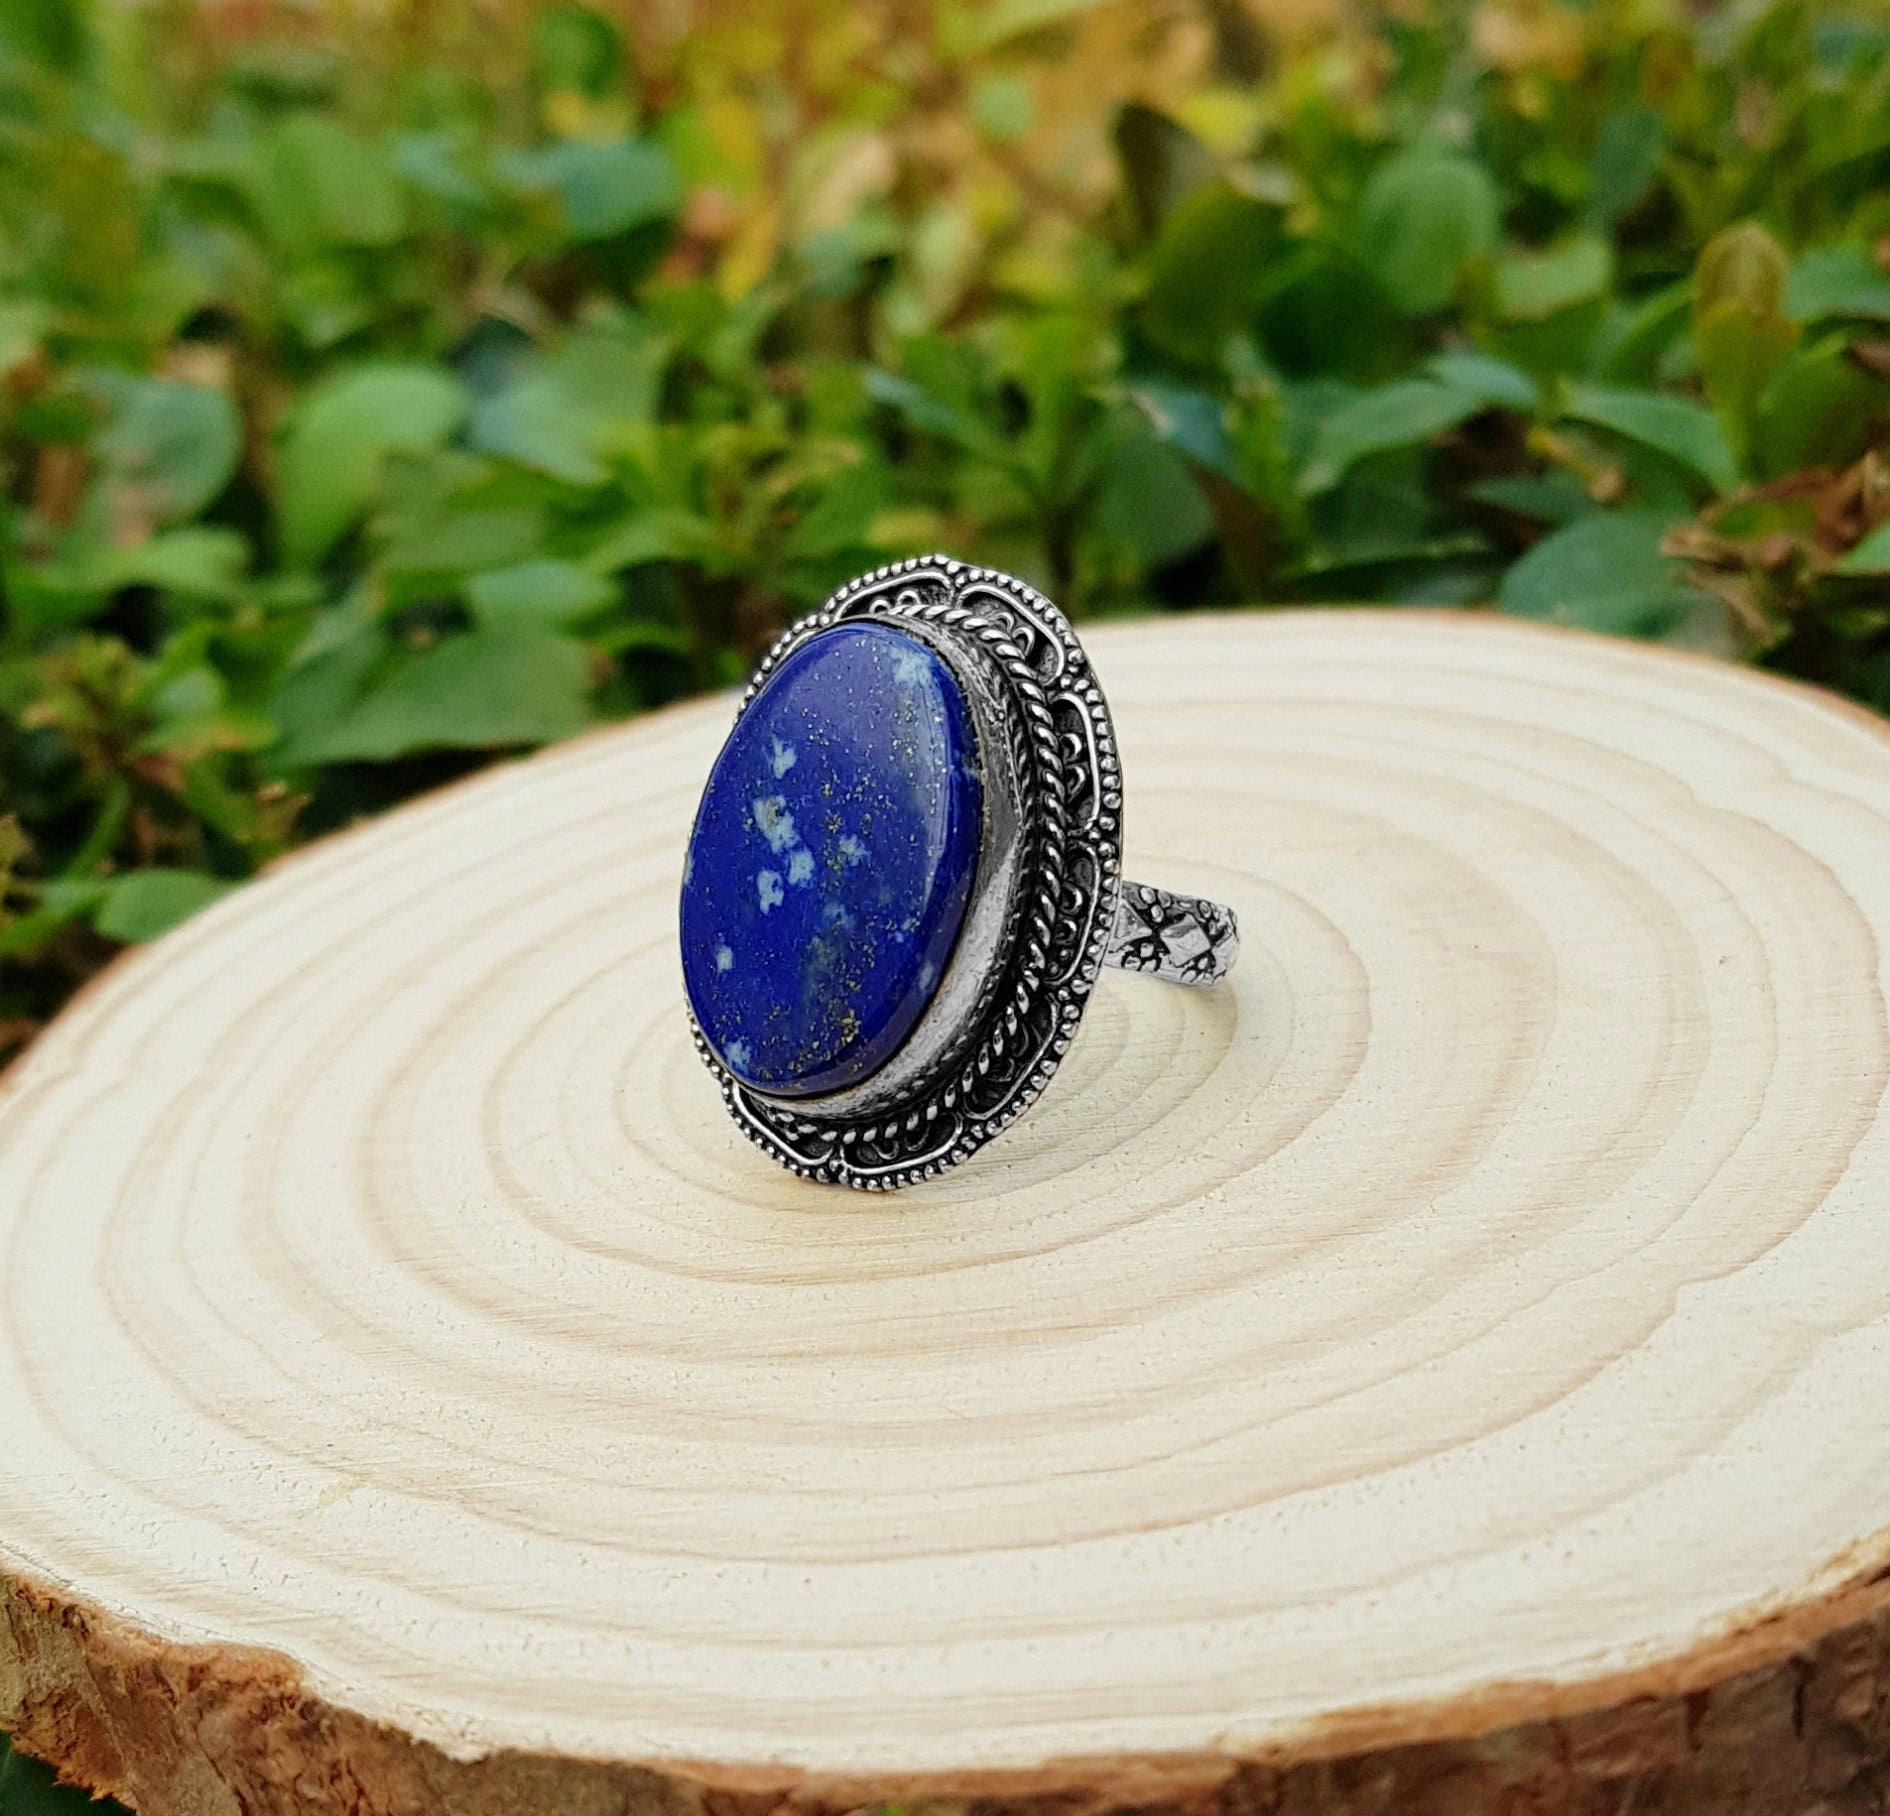 Lapis Lazuli Ring In Sterling Silver Size US 8 1/2 Big Statement Ring Boho Crystal Rings GypsyJewelry Unique Gift For Women